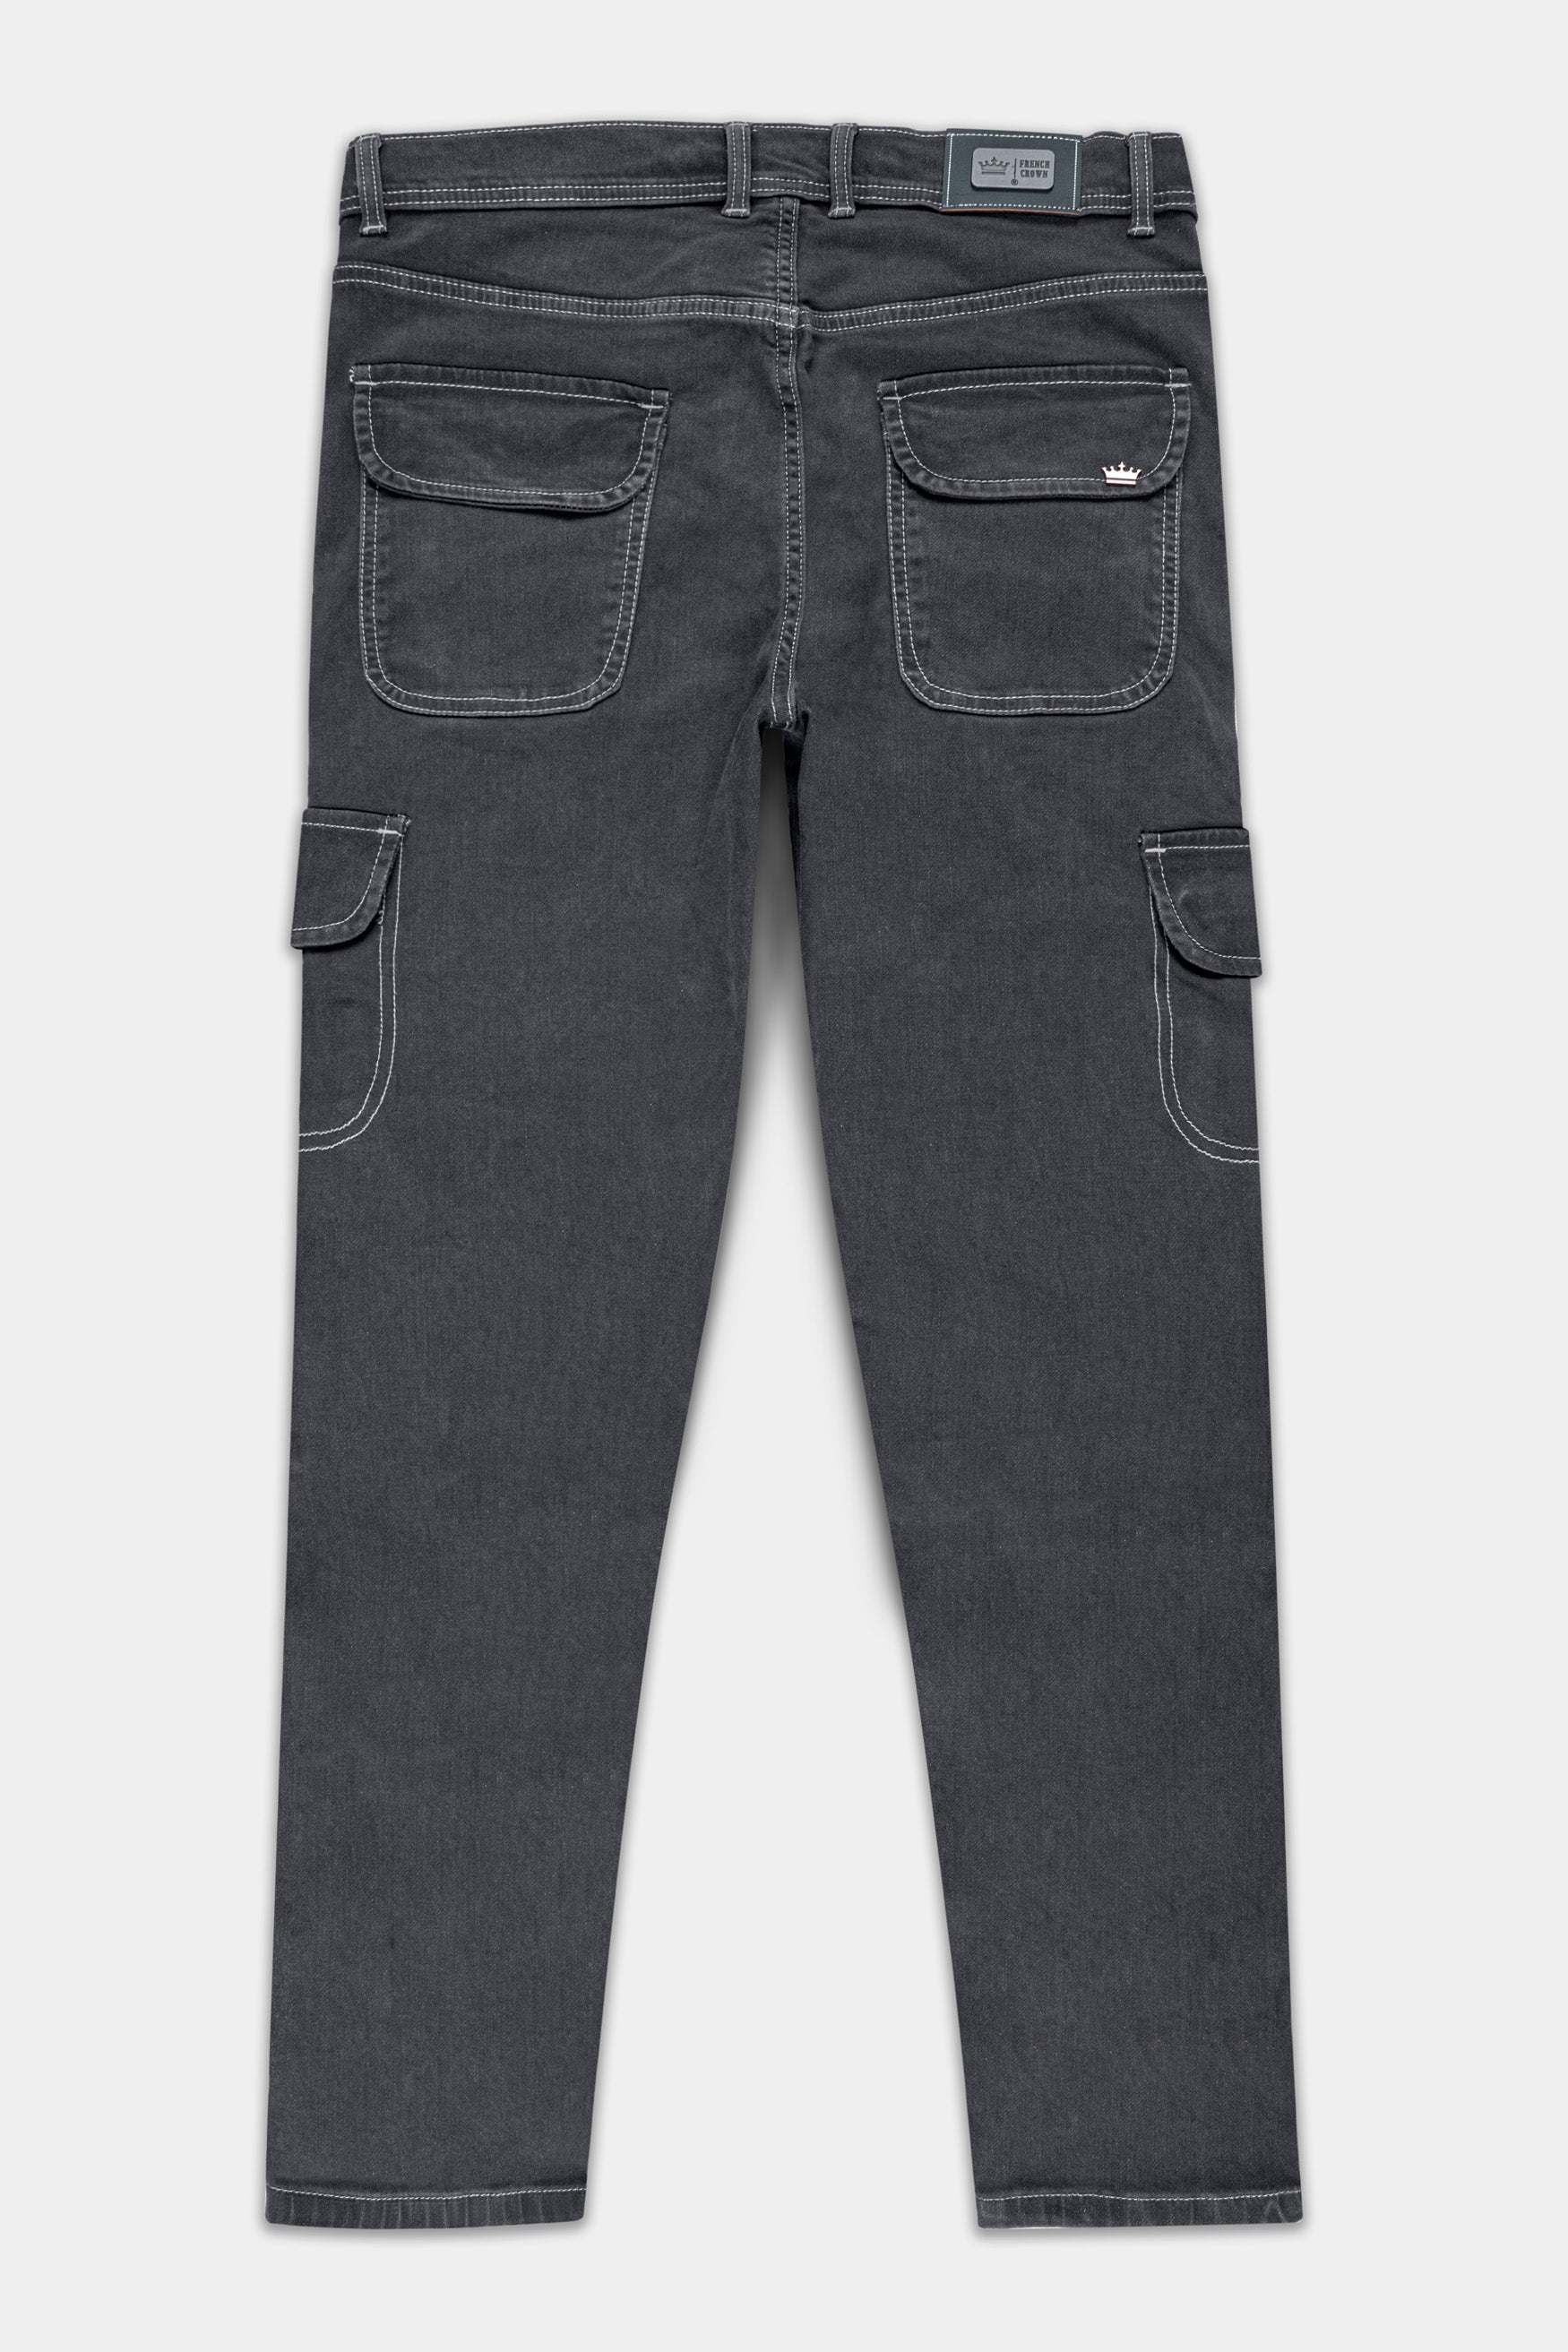 Charcoal Gray Rinse washed Cargo Denim